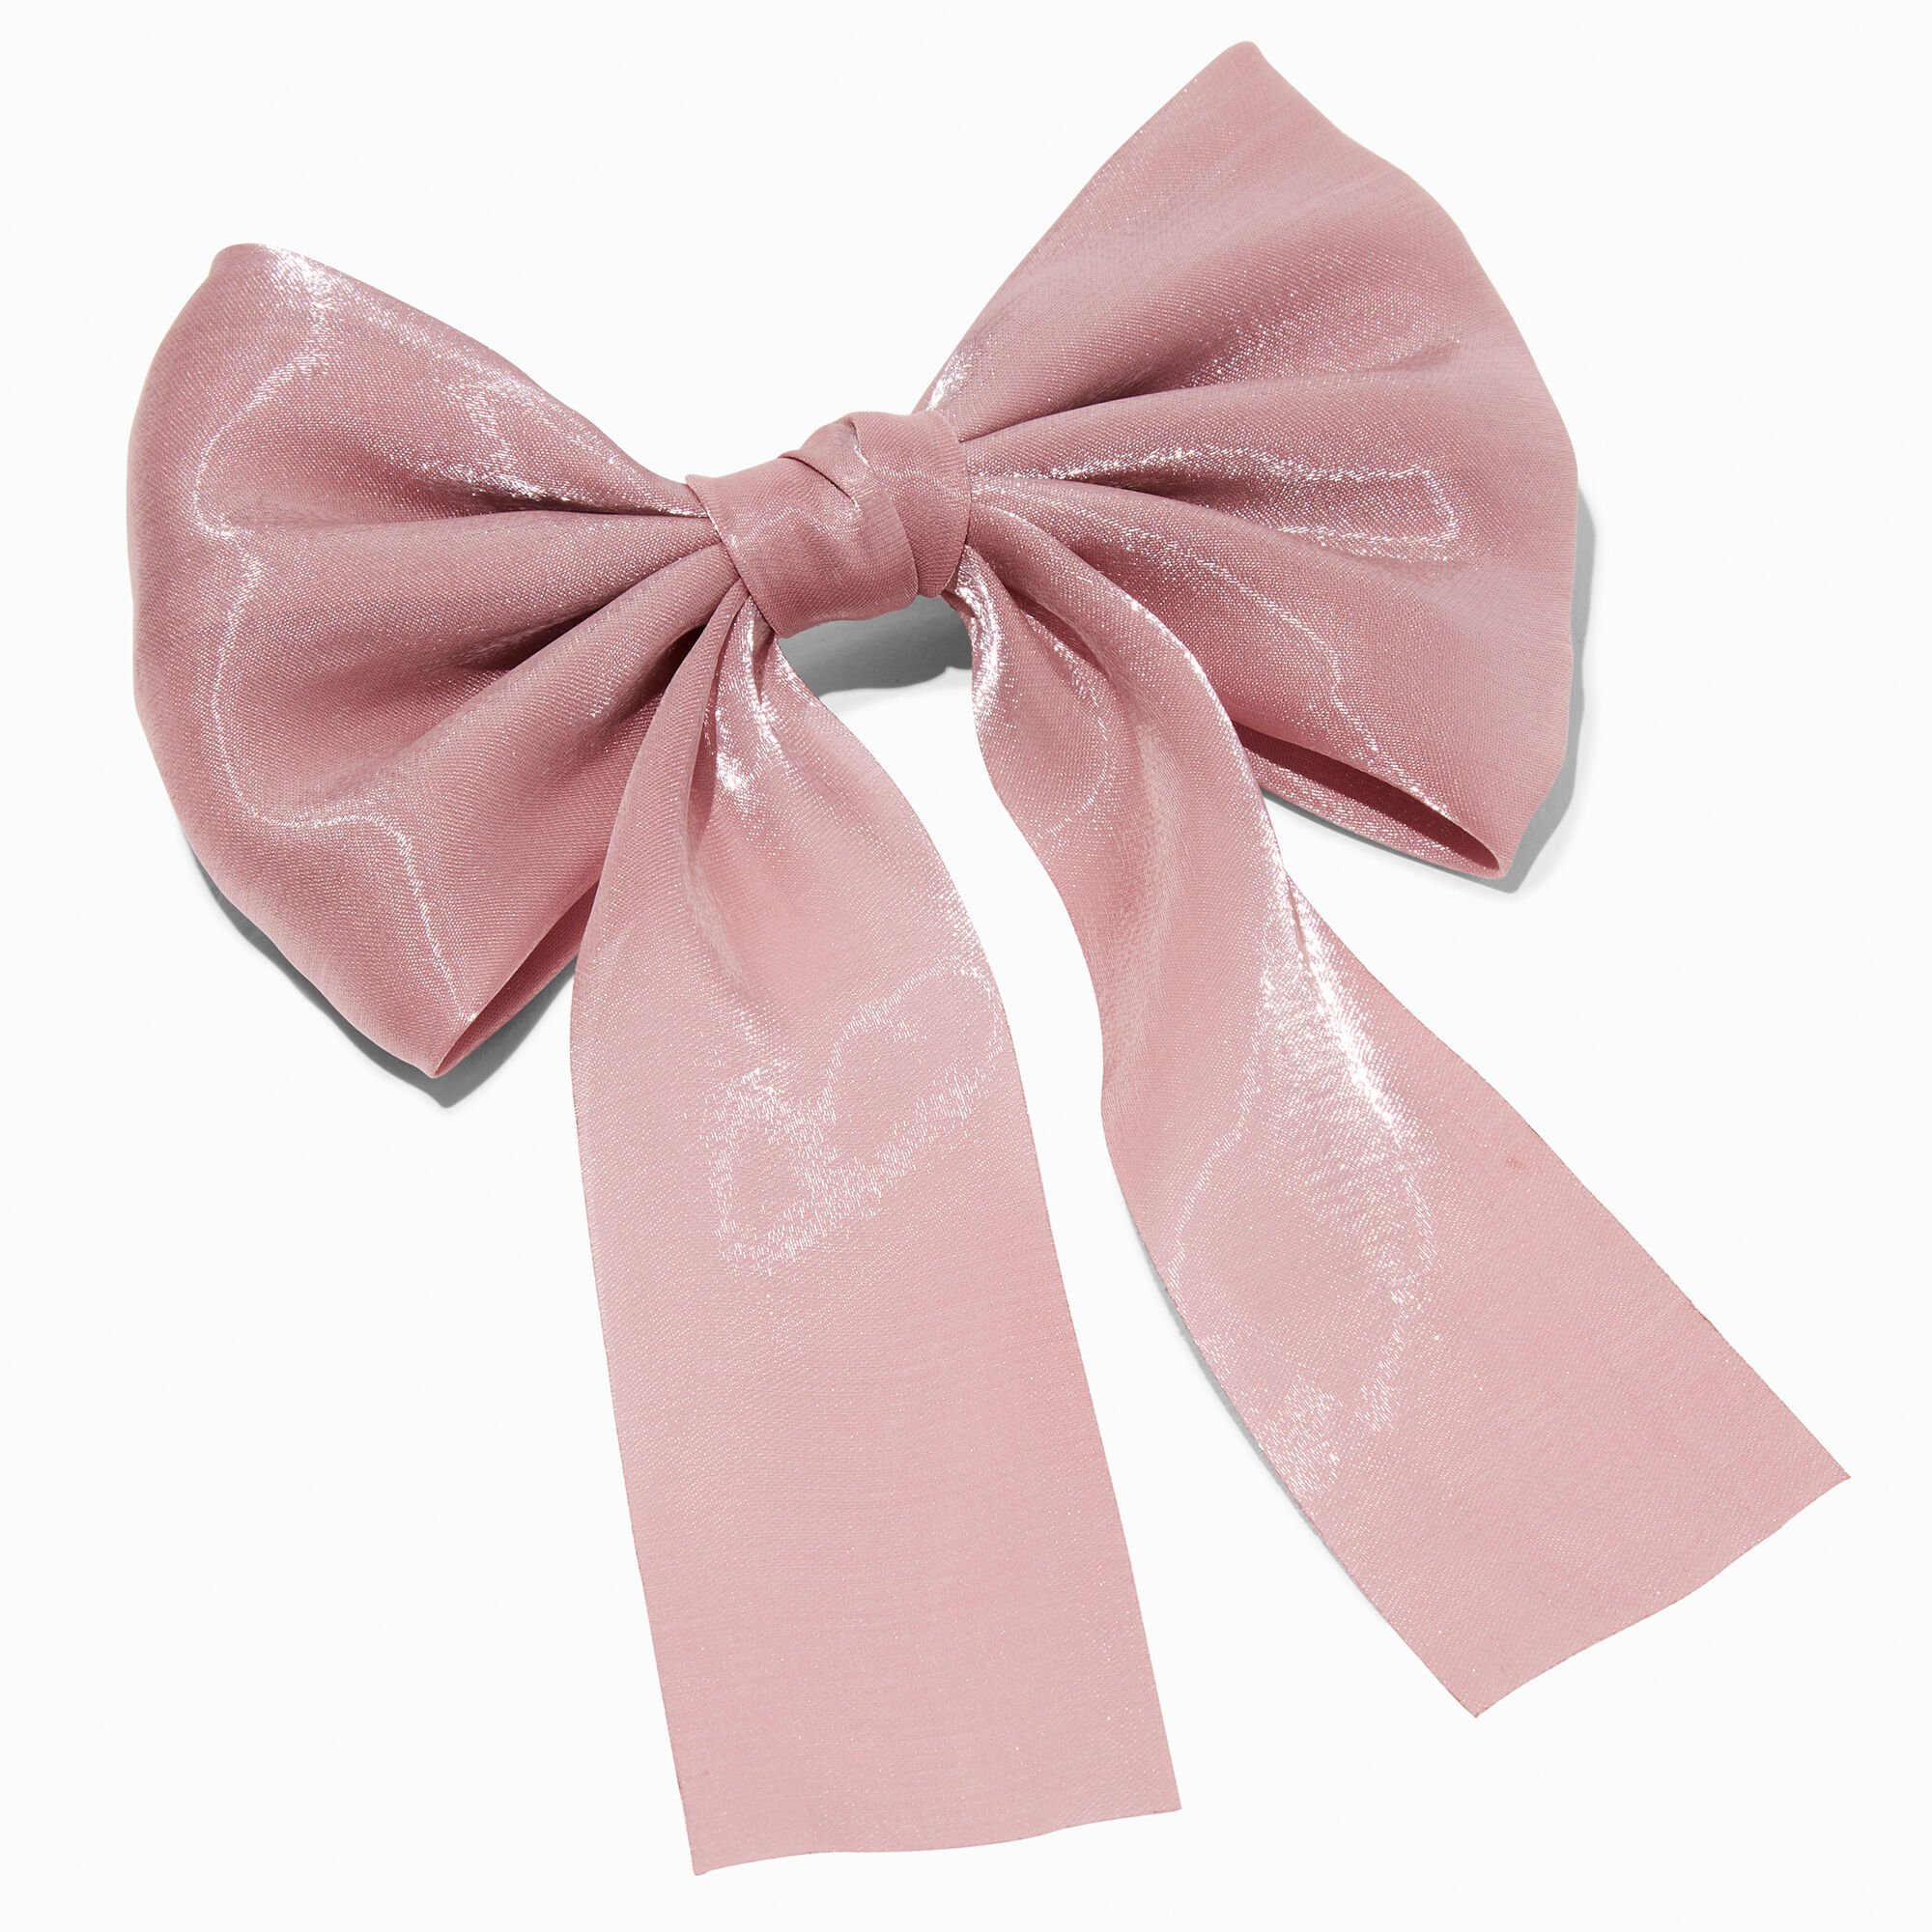 View Claires Sheer Bow Hair Clip Mauve information